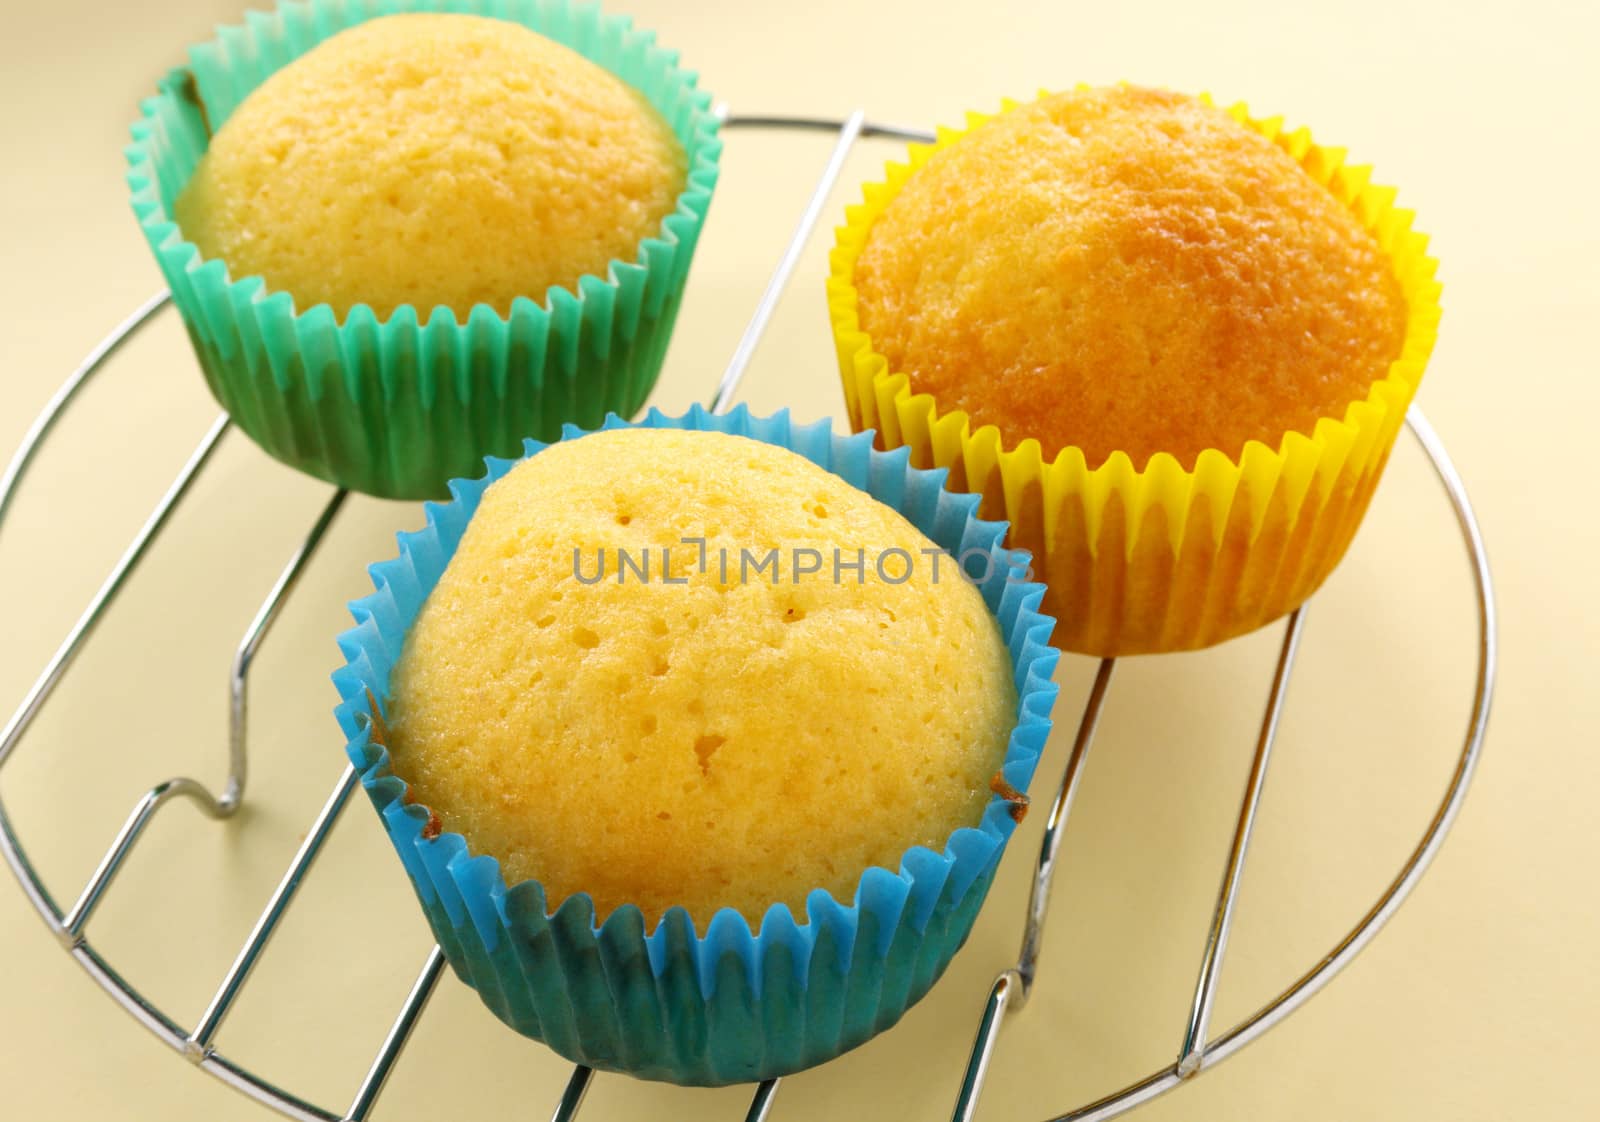 Fresh baked cup cakes straight from the oven.